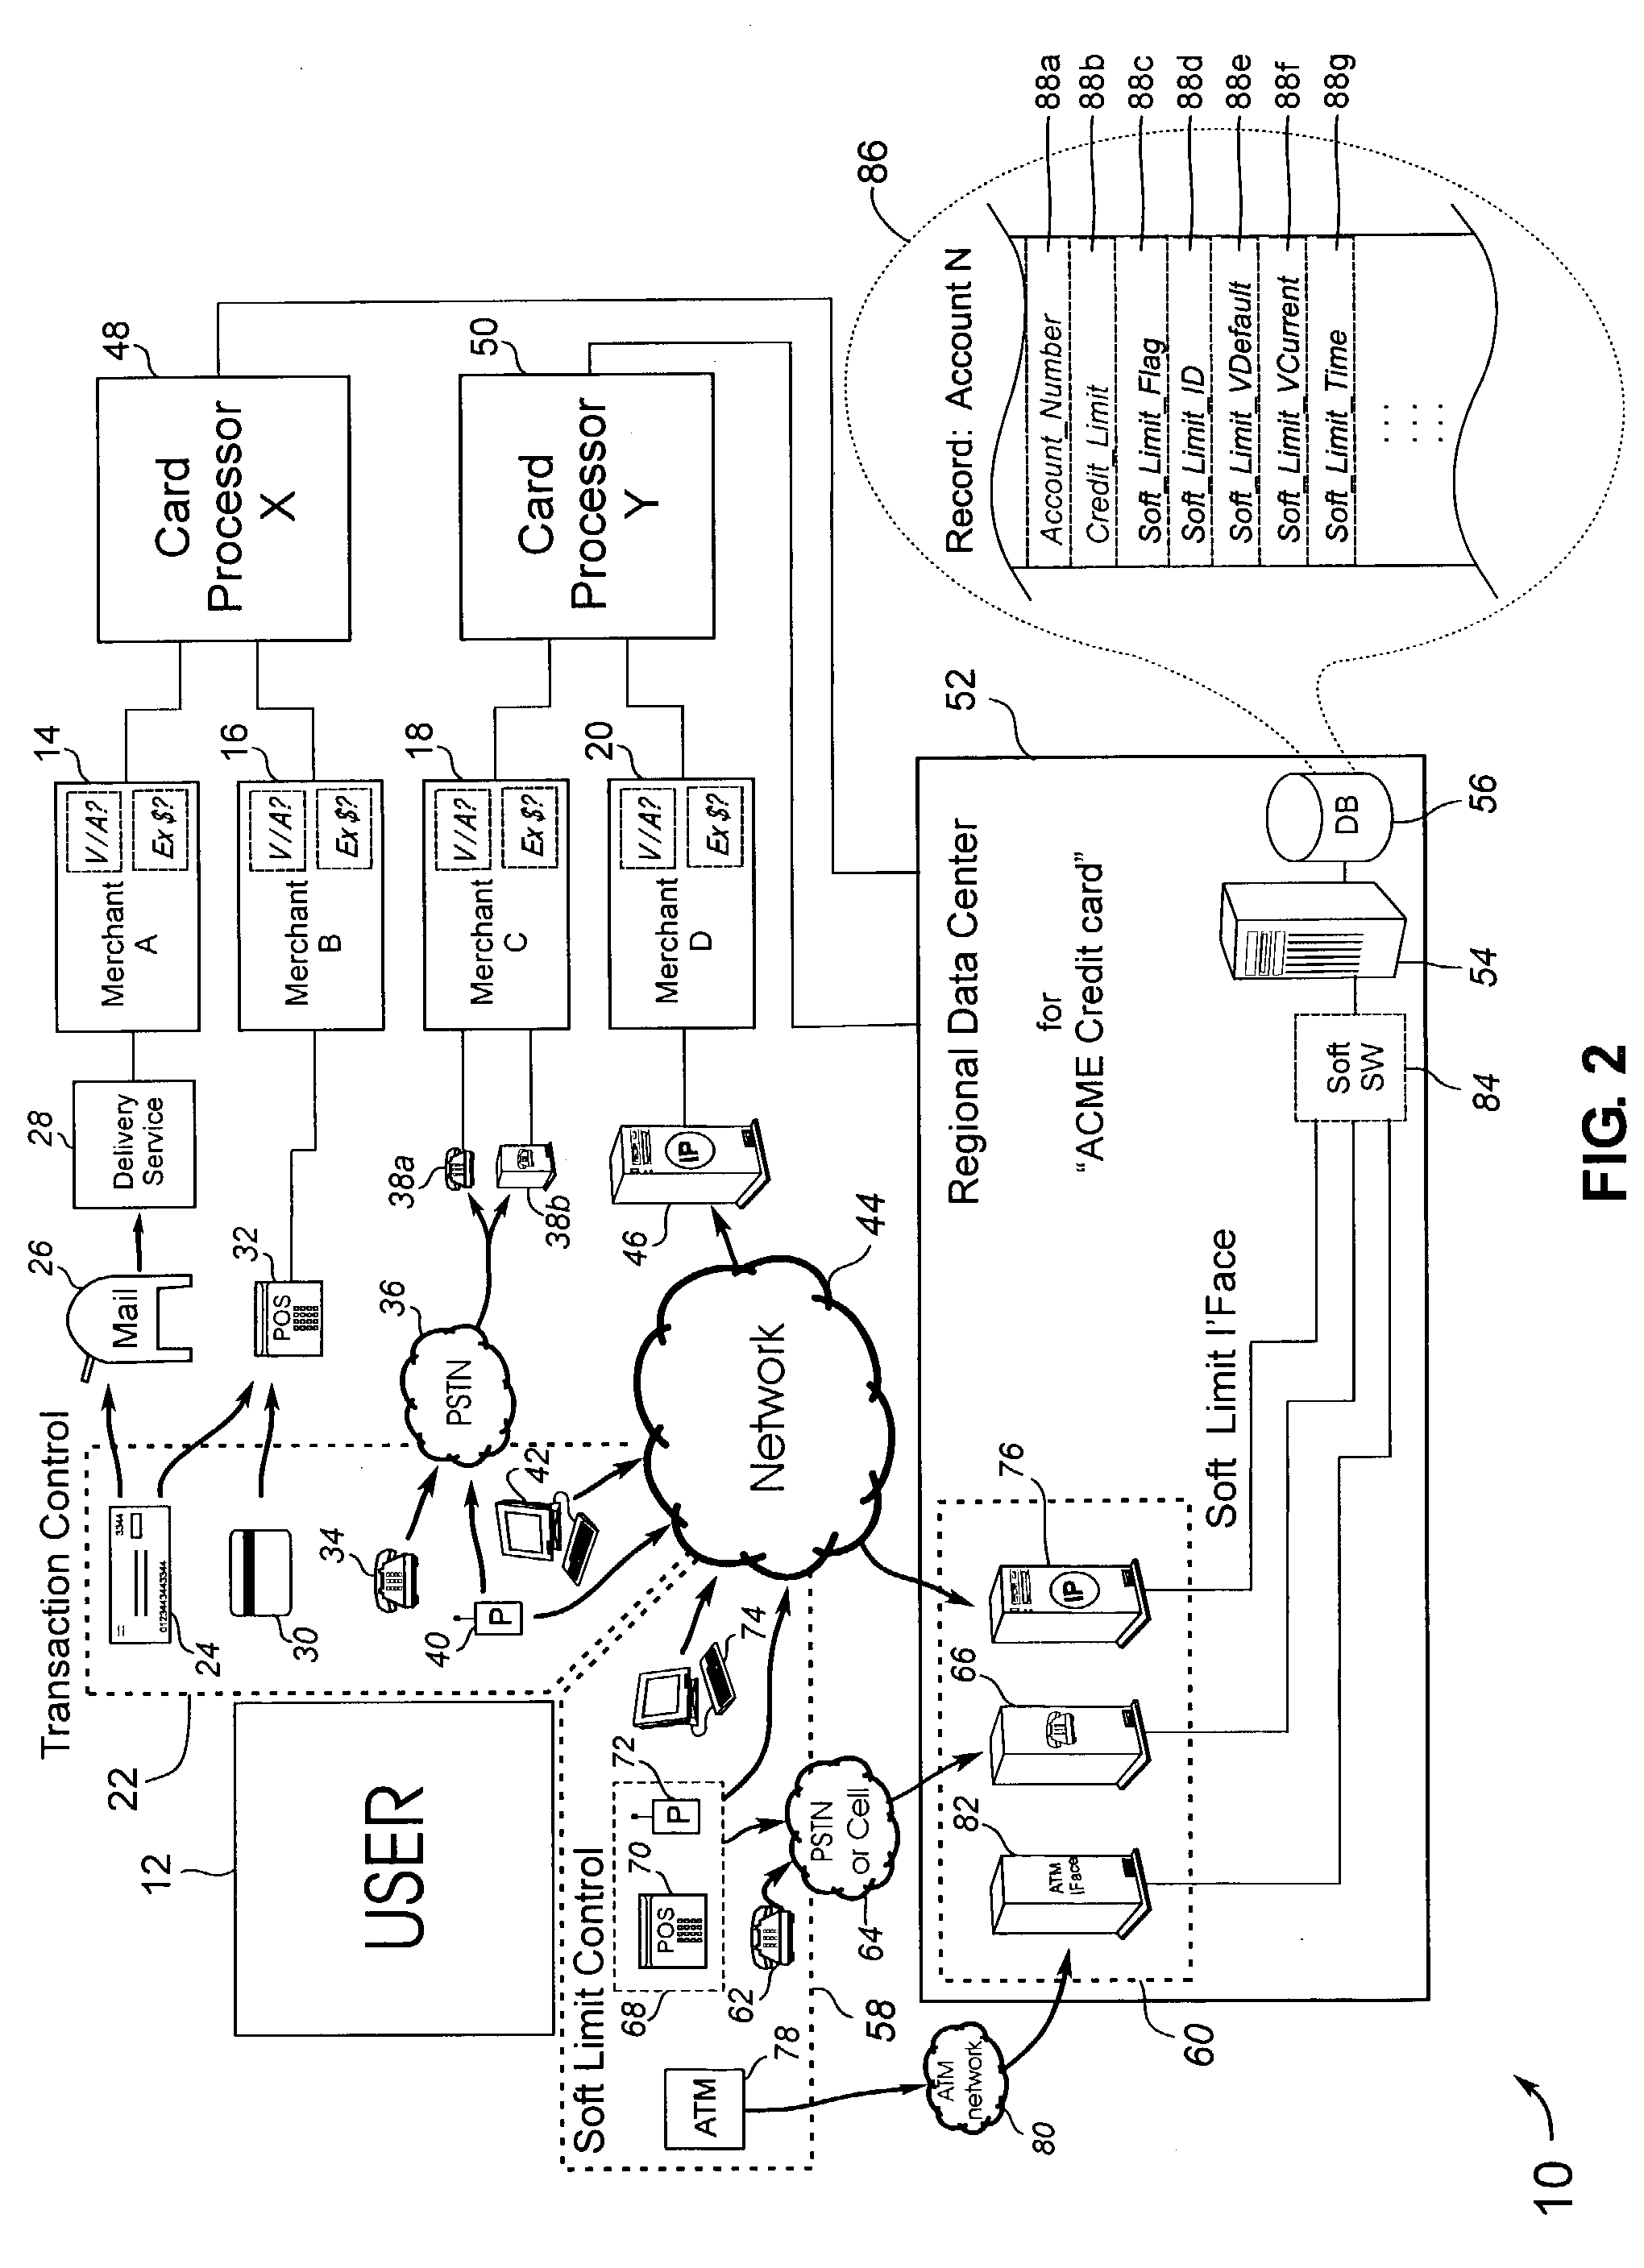 Automated soft limit control of electronic transaction accounts